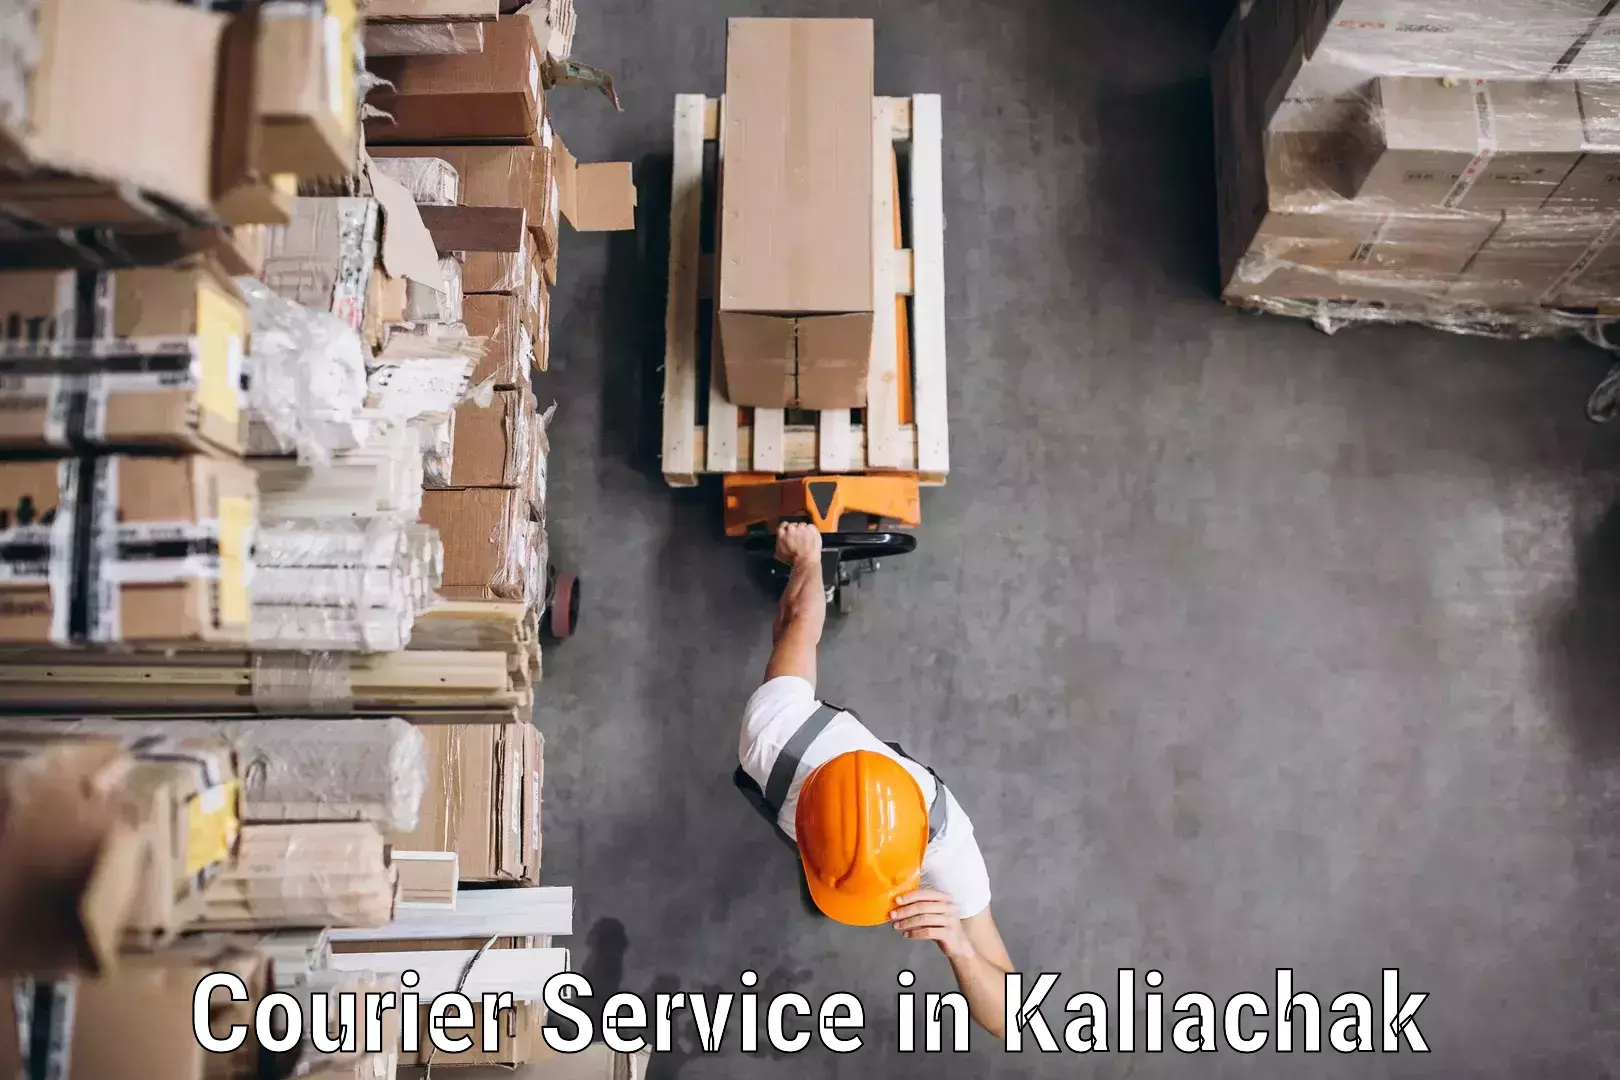 Sustainable delivery practices in Kaliachak